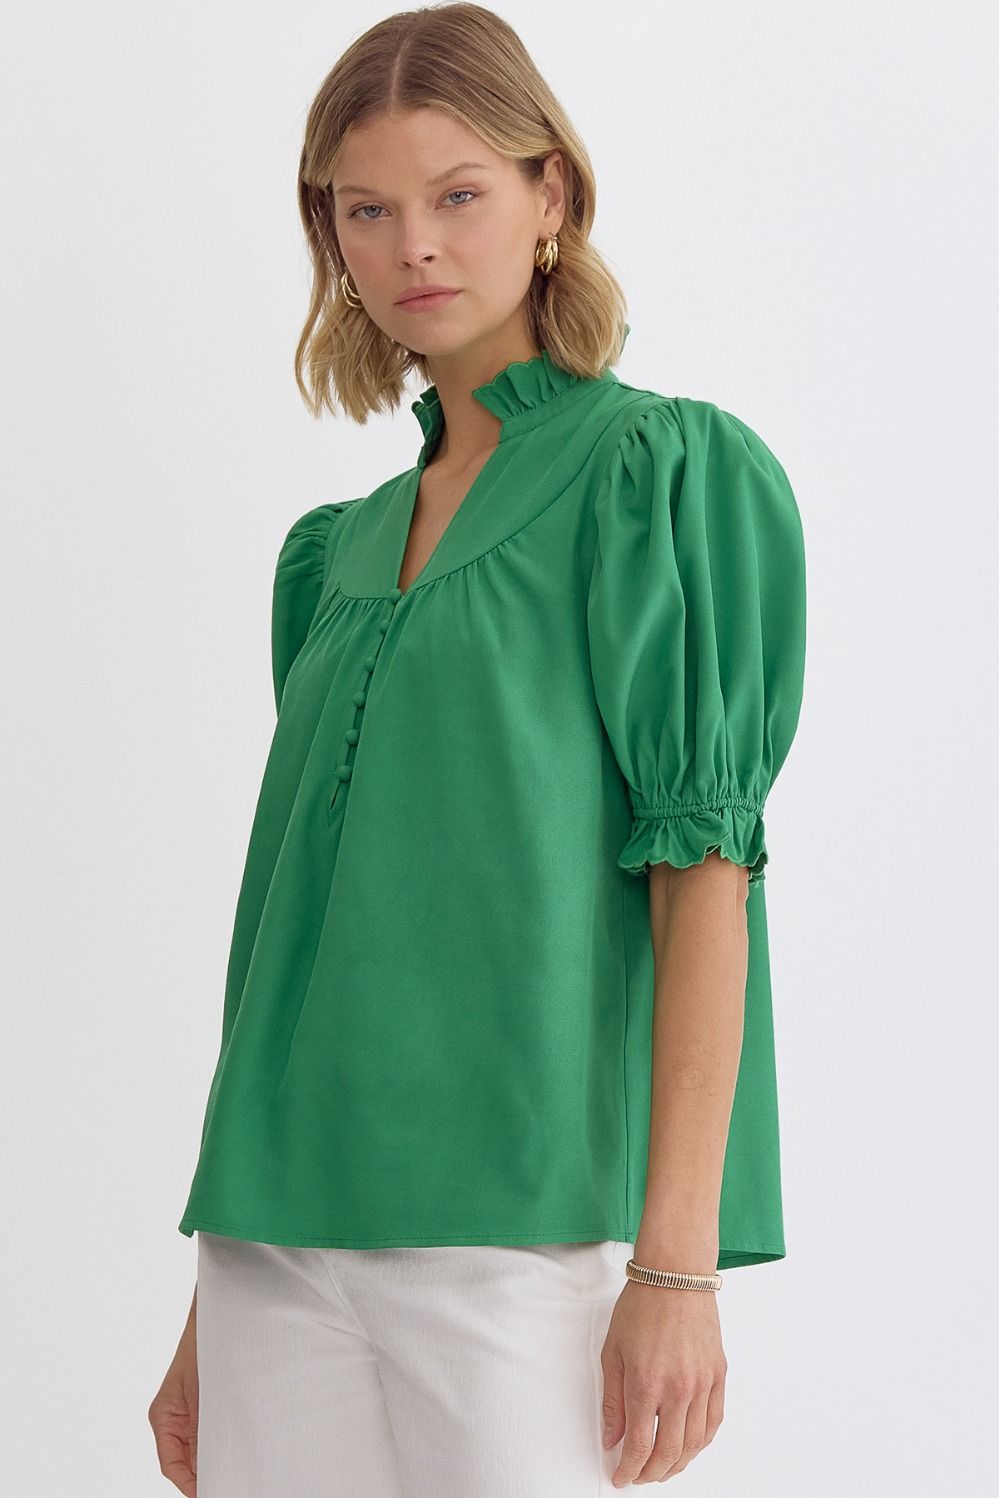 What A Vision Top in Green